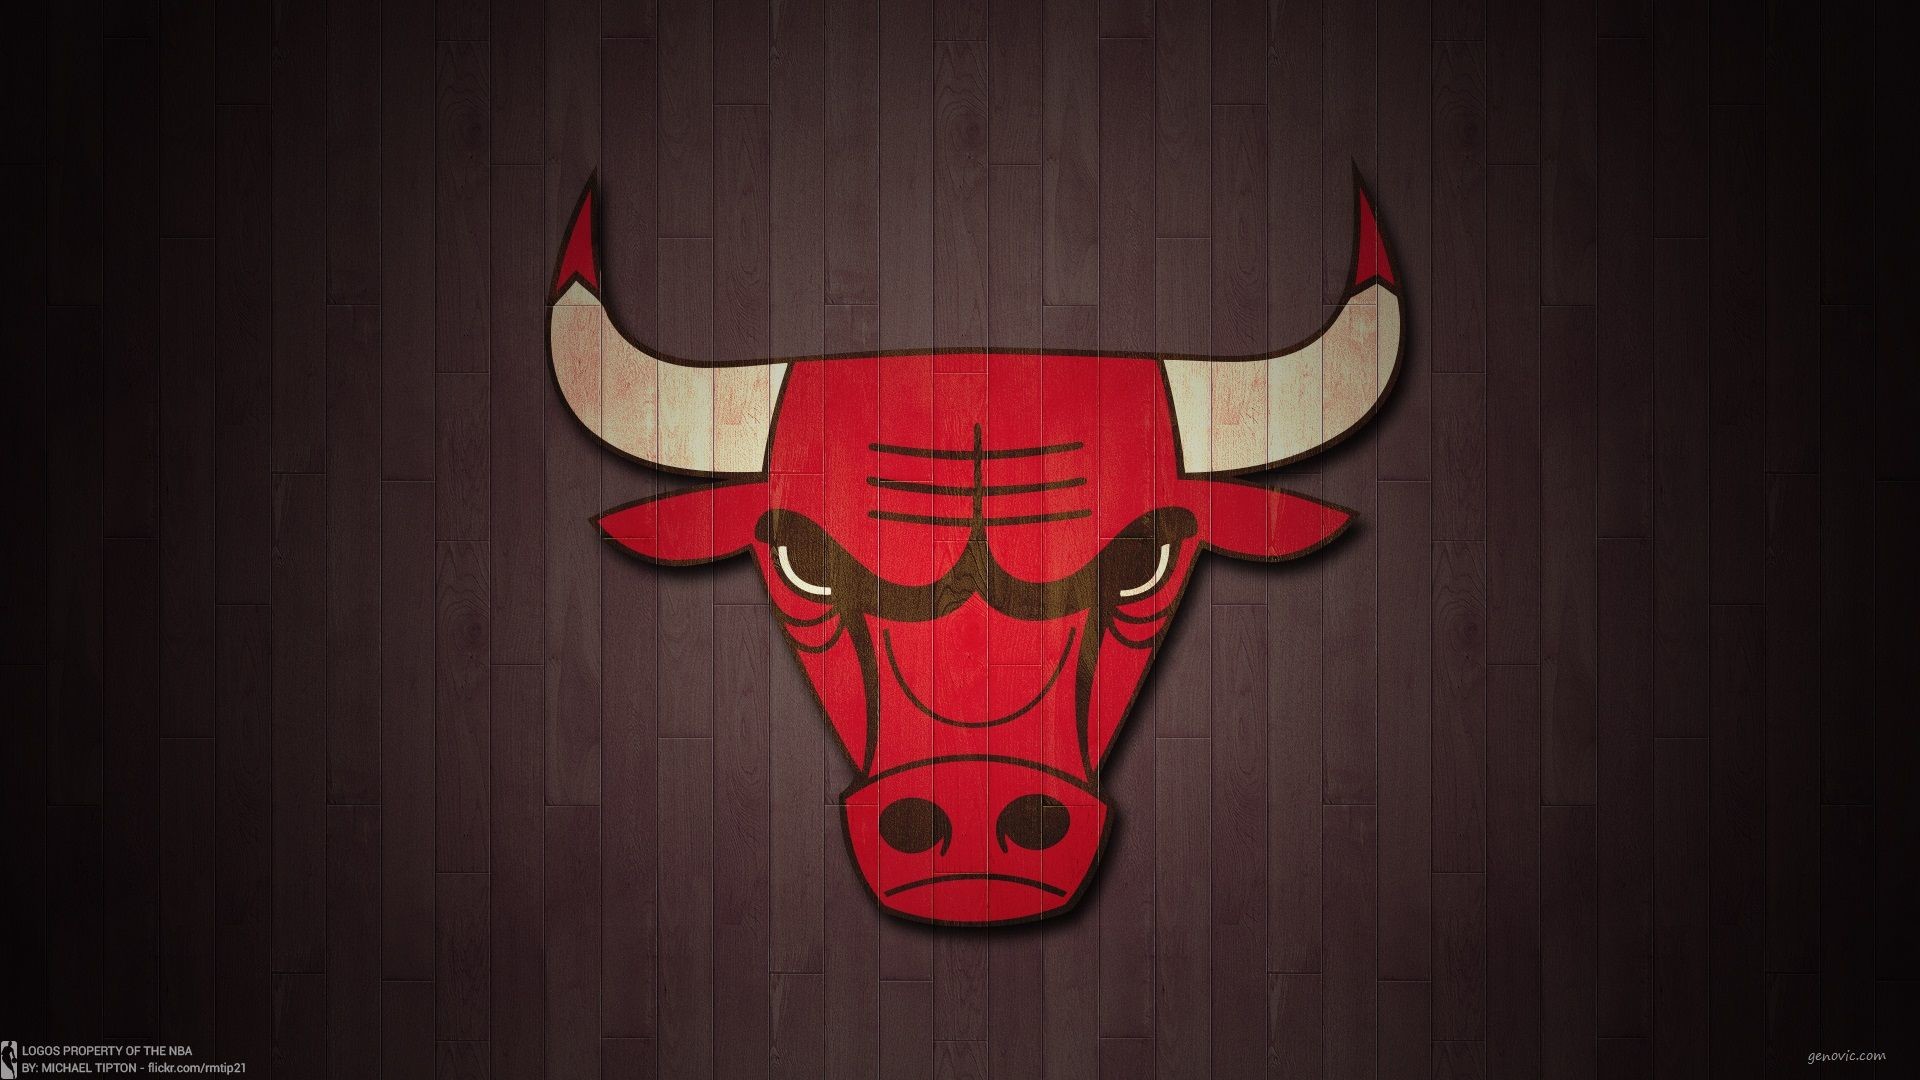 1920x1080 Search Results for “chicago bulls wallpaper hd iphone” – Adorable Wallpapers